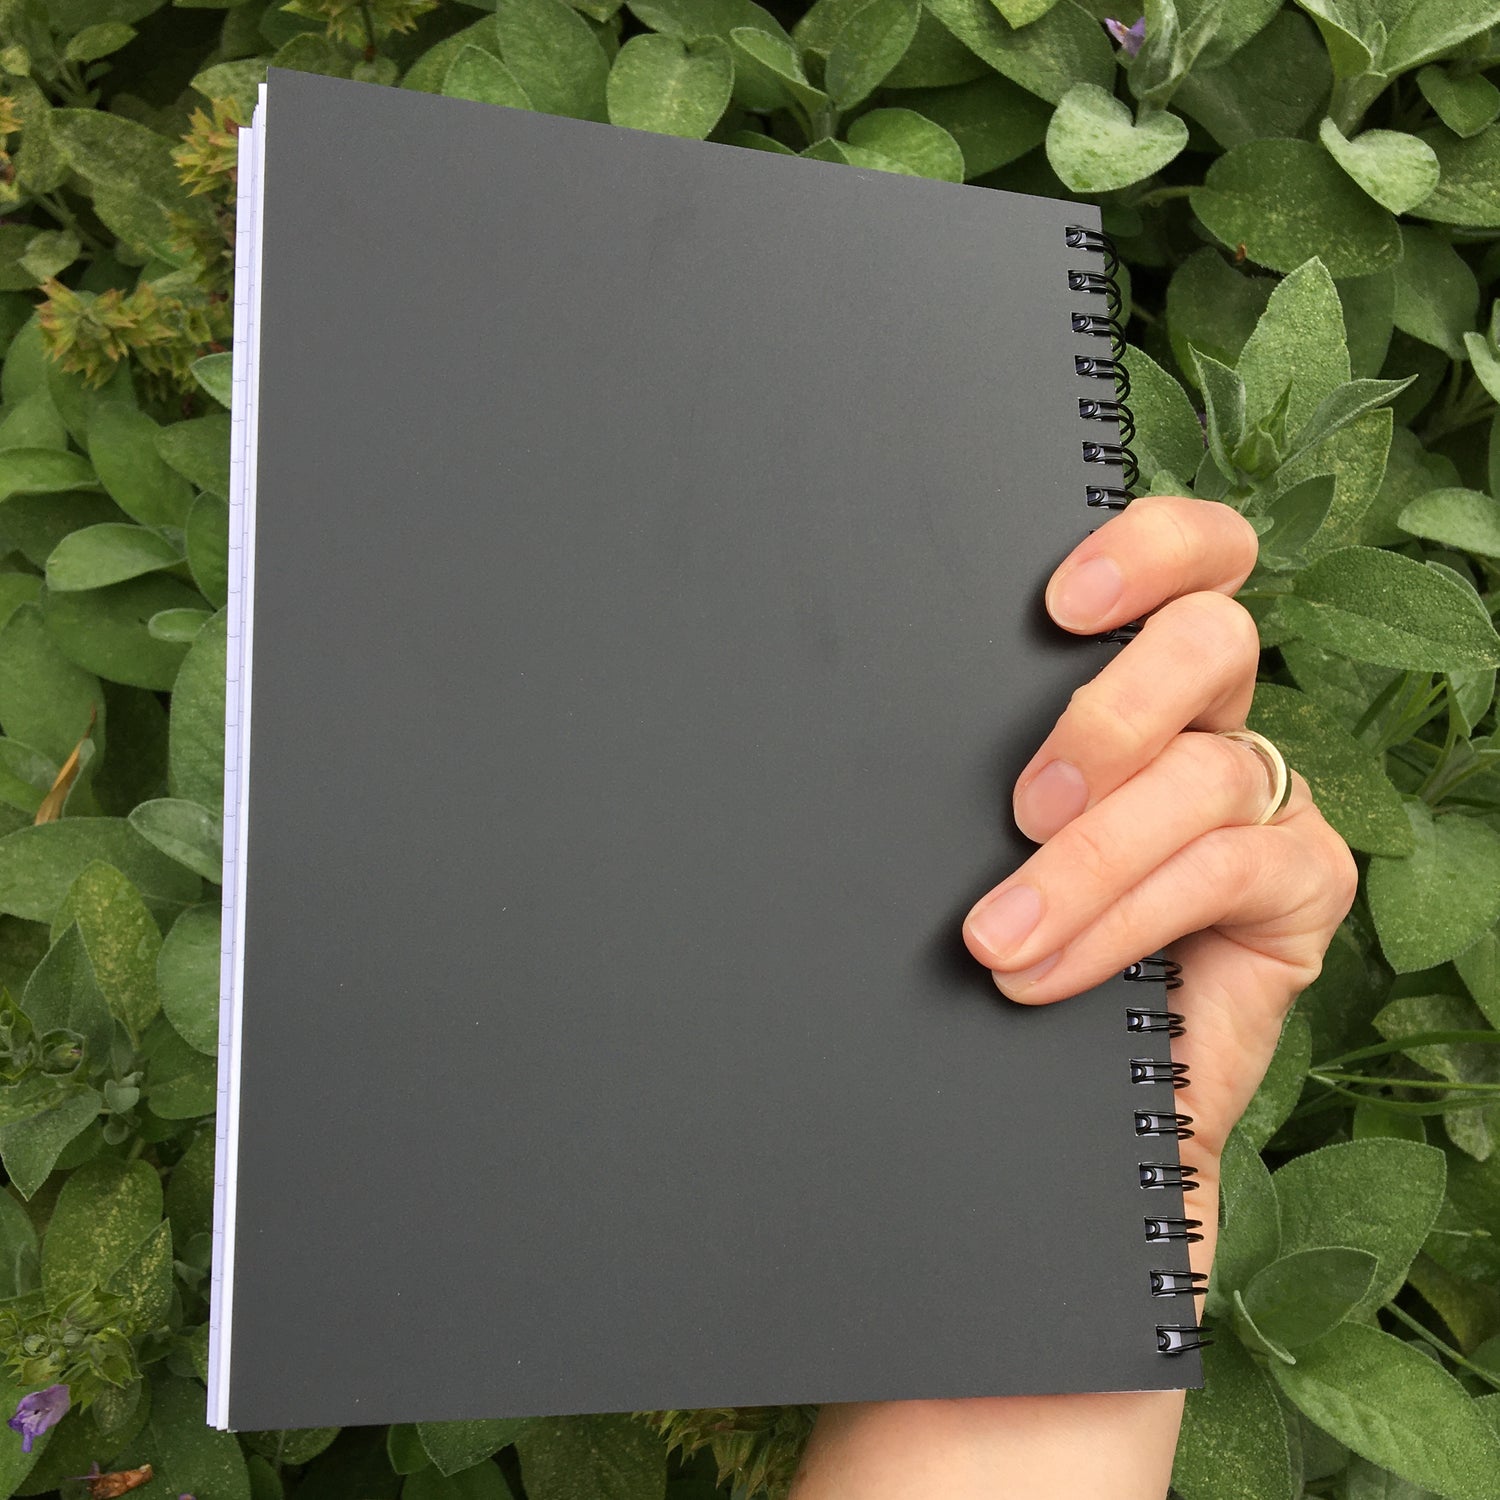 A hand holding a closed notebook showing the black back cover